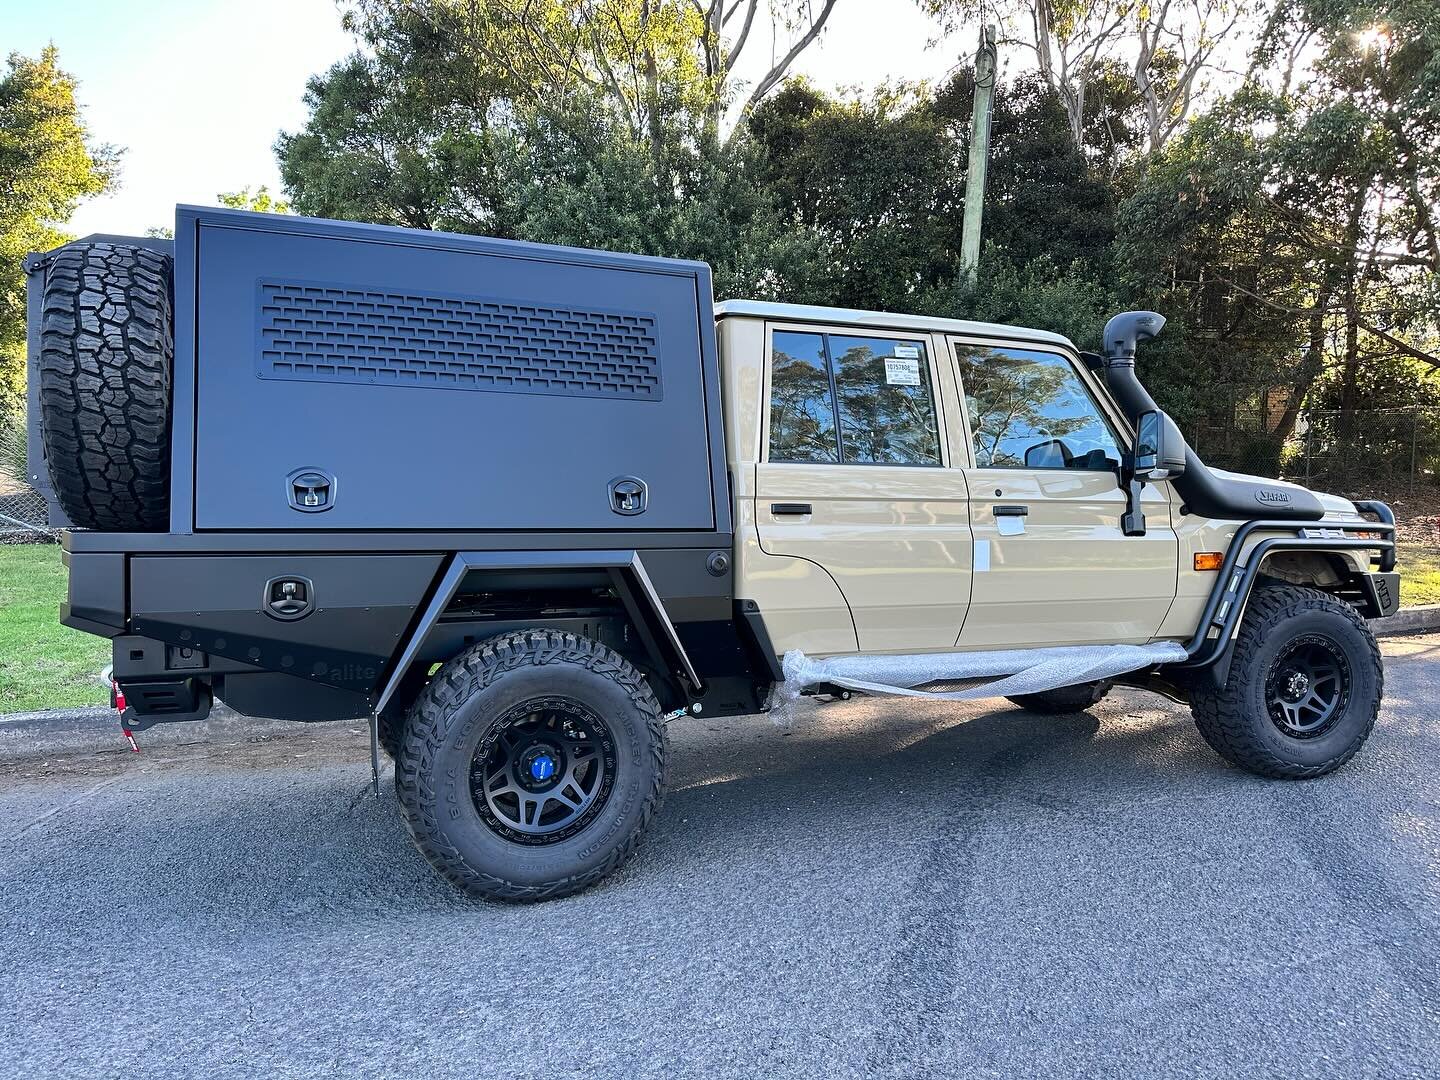 This 79 Series Land Cruiser is going to turn some heads&hellip; 

FEATURING 
-Custom designed Full time canopy body
-Under tray toolboxes with dress panels 
-Flared mudguards 
-Sealed trundle drawer
-125L water tank with Pump
- 130L Bushman&rsquo;s f